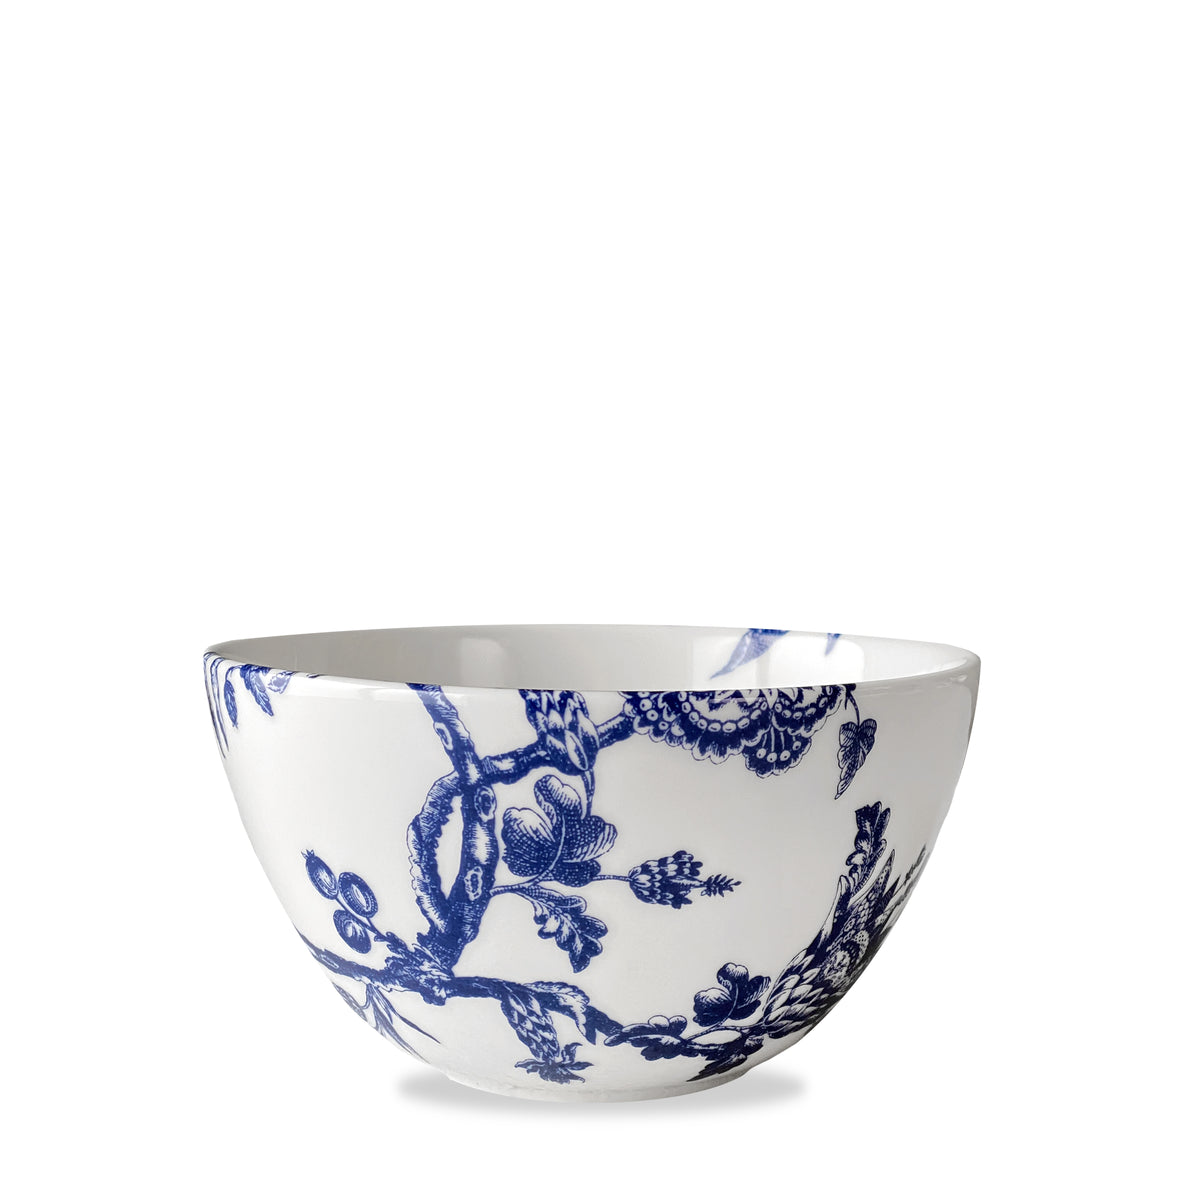 Introducing the Arcadia porcelain dinnerware collection, featuring the Caskata Arcadia Cereal Bowl with a delicate blue floral and tree branch pattern inspired by the Williamsburg Foundation&#39;s timeless designs.